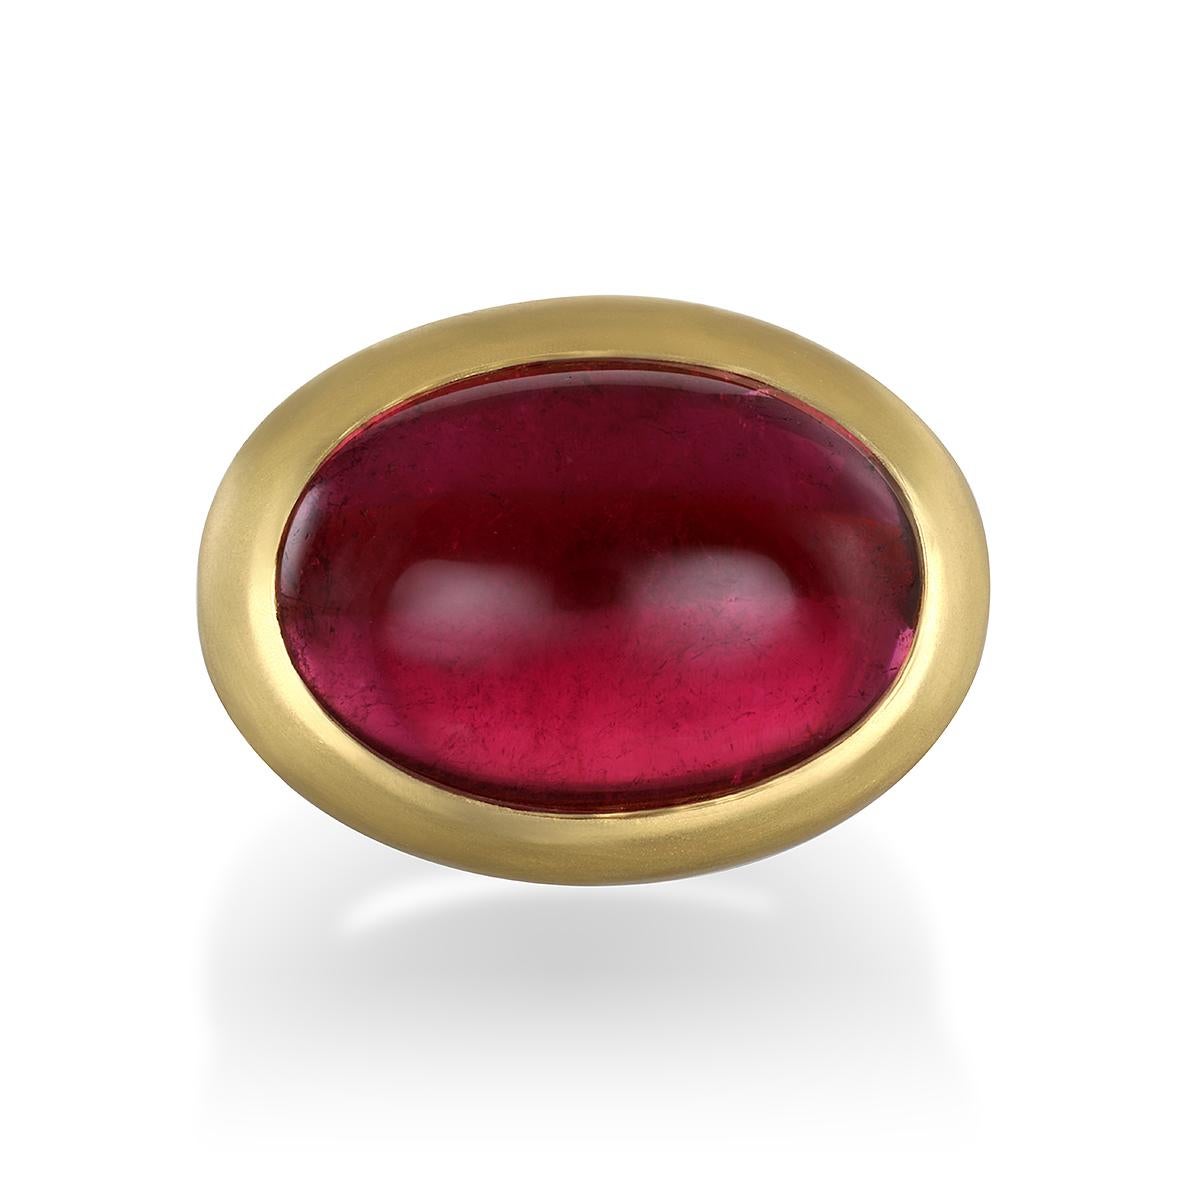 Faye Kim's 22 Karat Gold Pink Tourmaline Hinged Cabochon Ring, with its oversize stone and intriguing berry hue, is beautifully bezel set and matte finished. The ring can be worn for any occasion and is and is certain to be a conversation